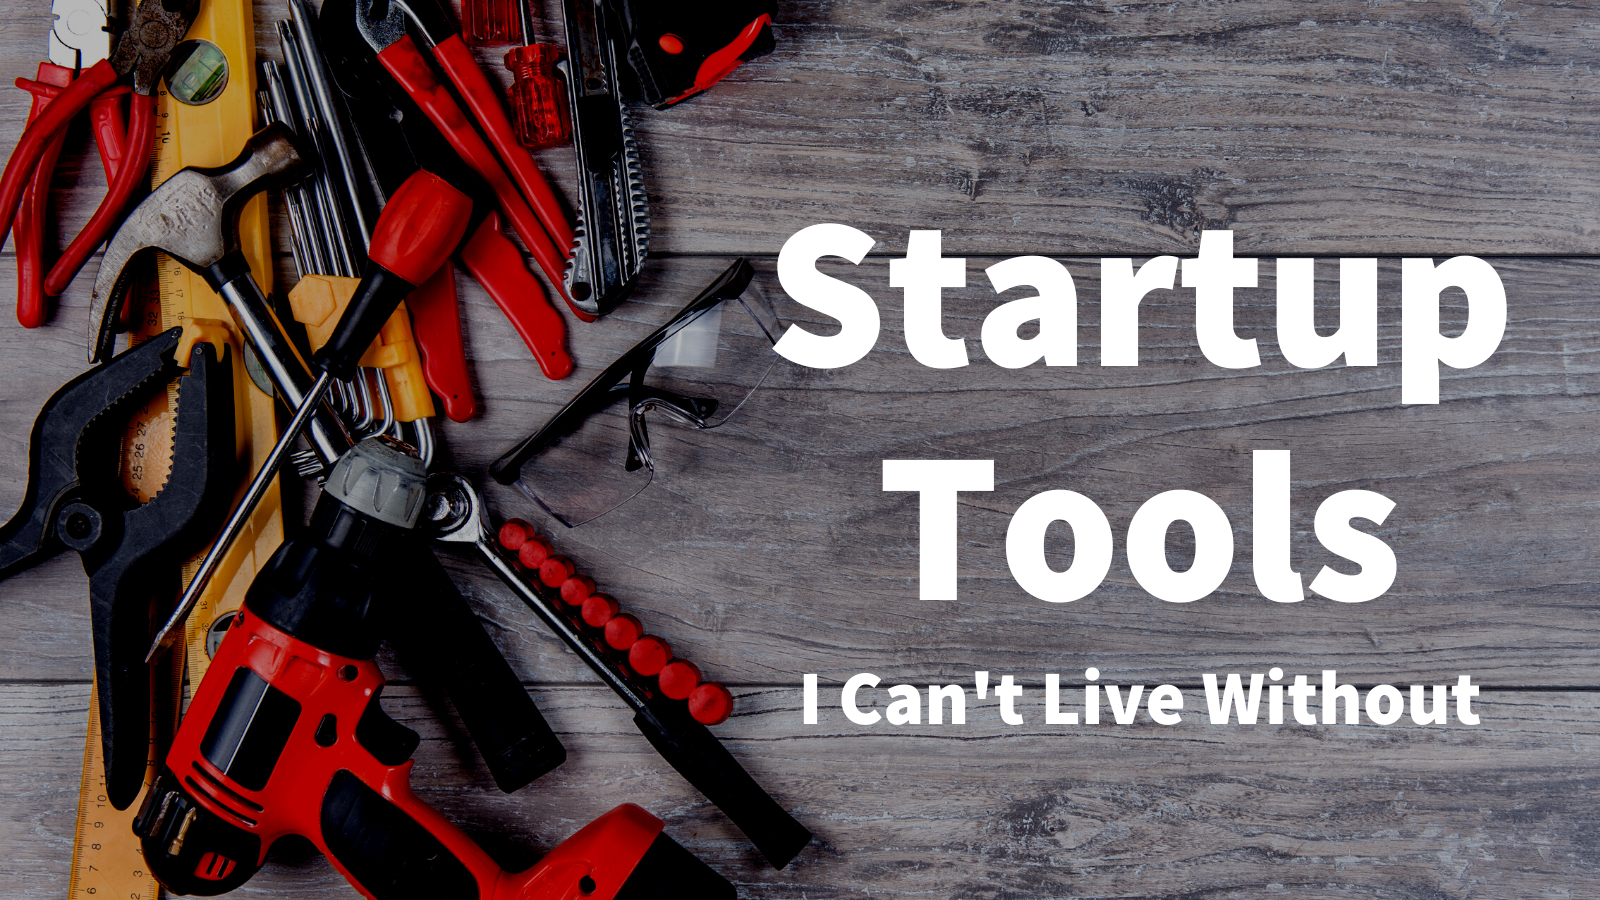 The Startup Tools I Can't Live Without